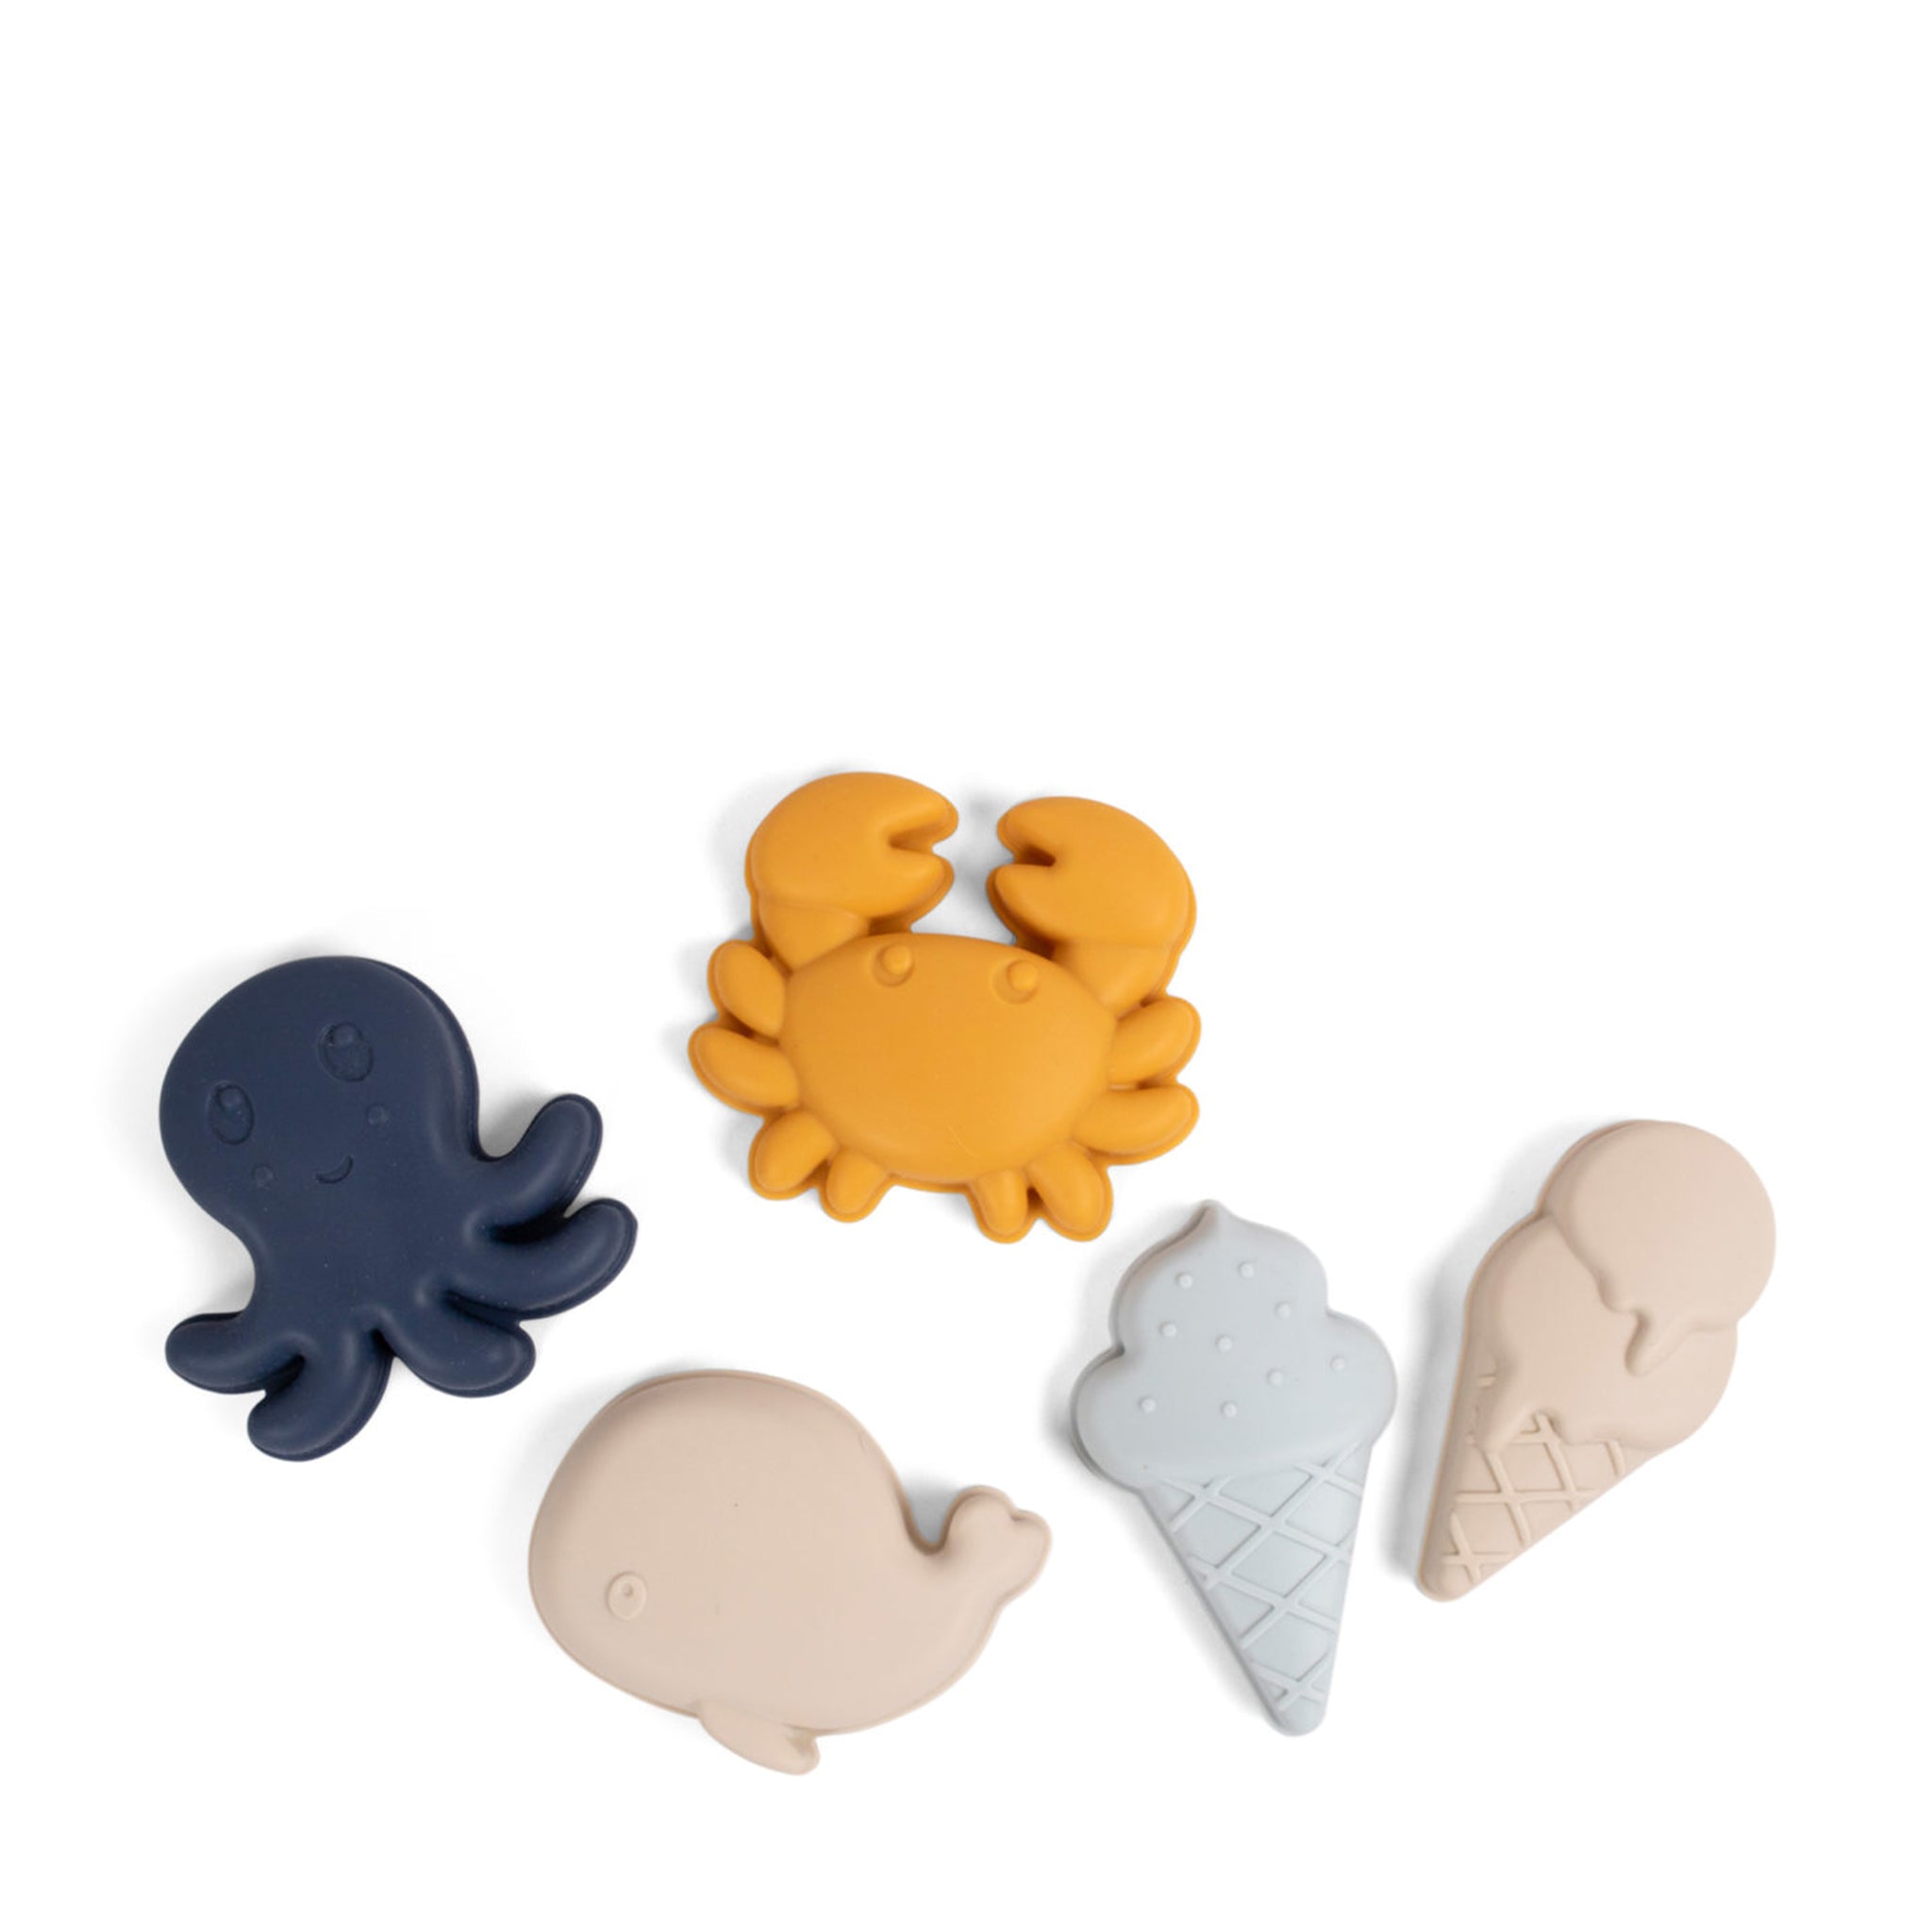 SILICONE SAND TOYS 5 PIECES